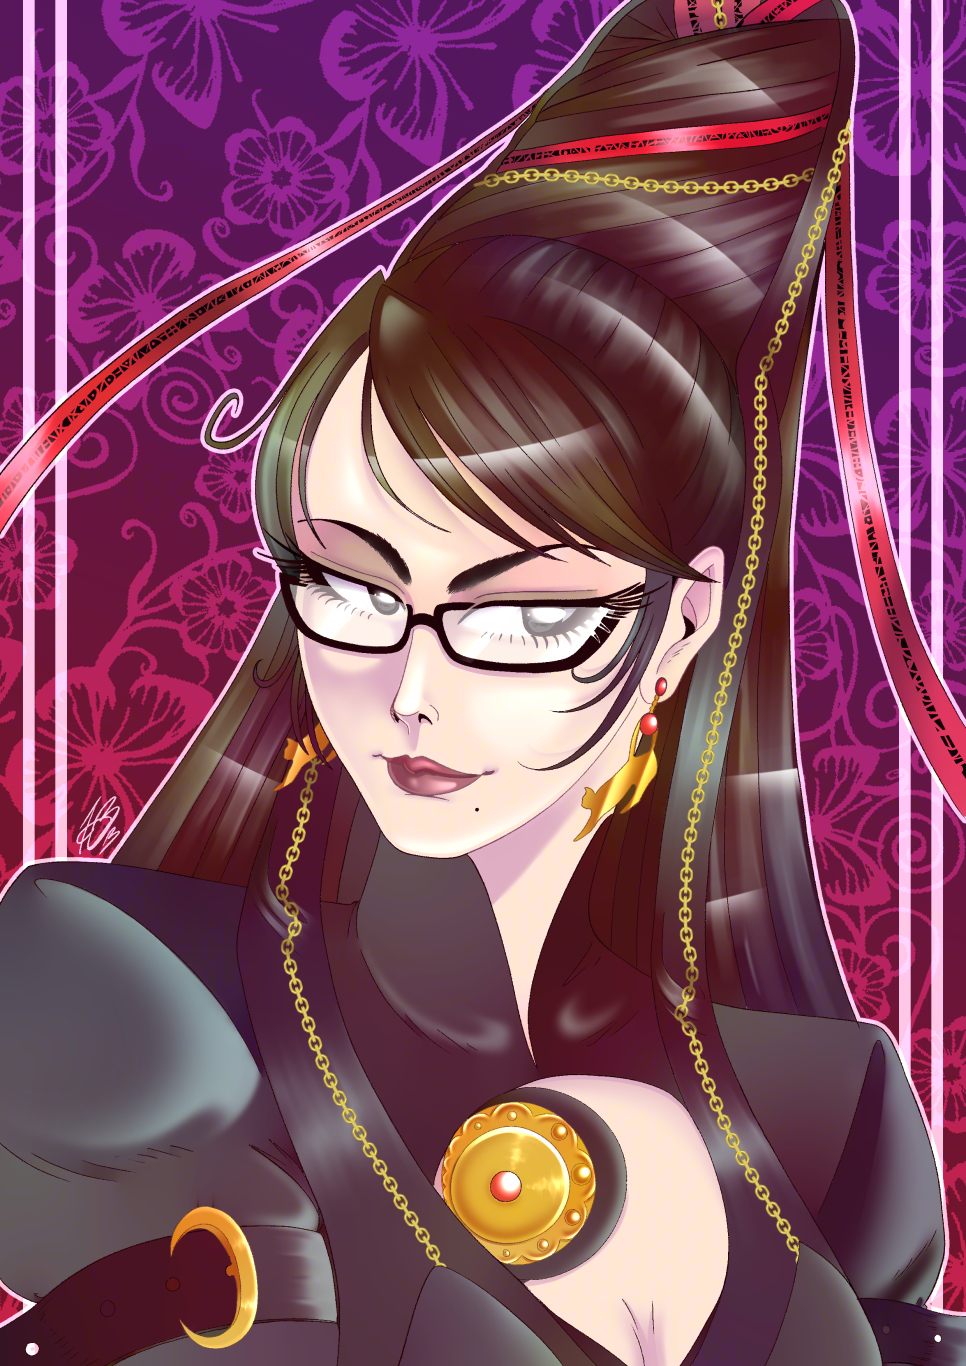 Full colour, digital illustration of Bayonetta in her design from the first game. She's illustrated from the bust up. She's looking to the right while her head is facing the left. The background is a gradient of deep purple burgundy with butterfly and flower motifs.